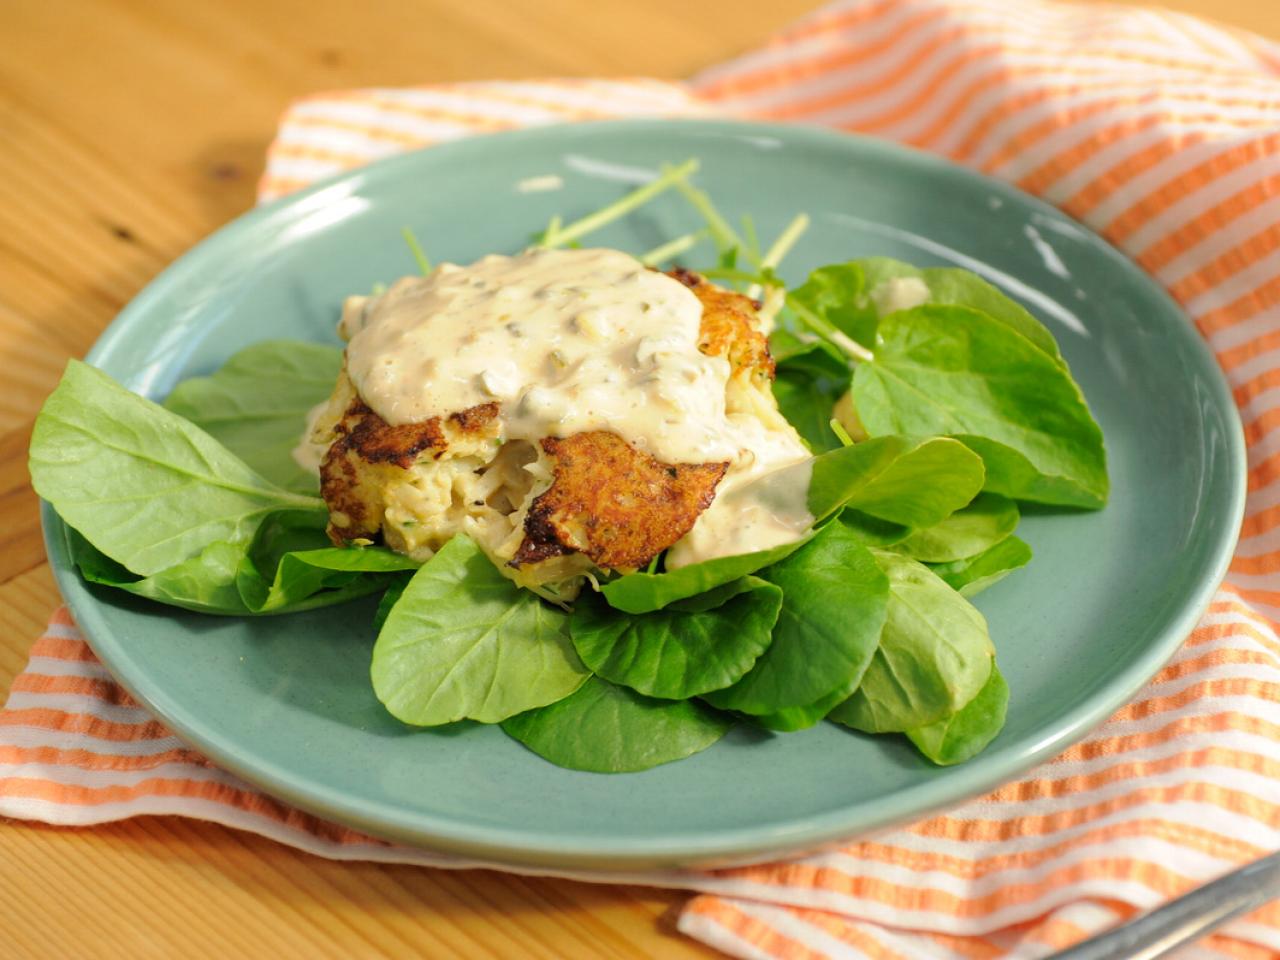 Maryland Crab Cakes - Dinner at the Zoo